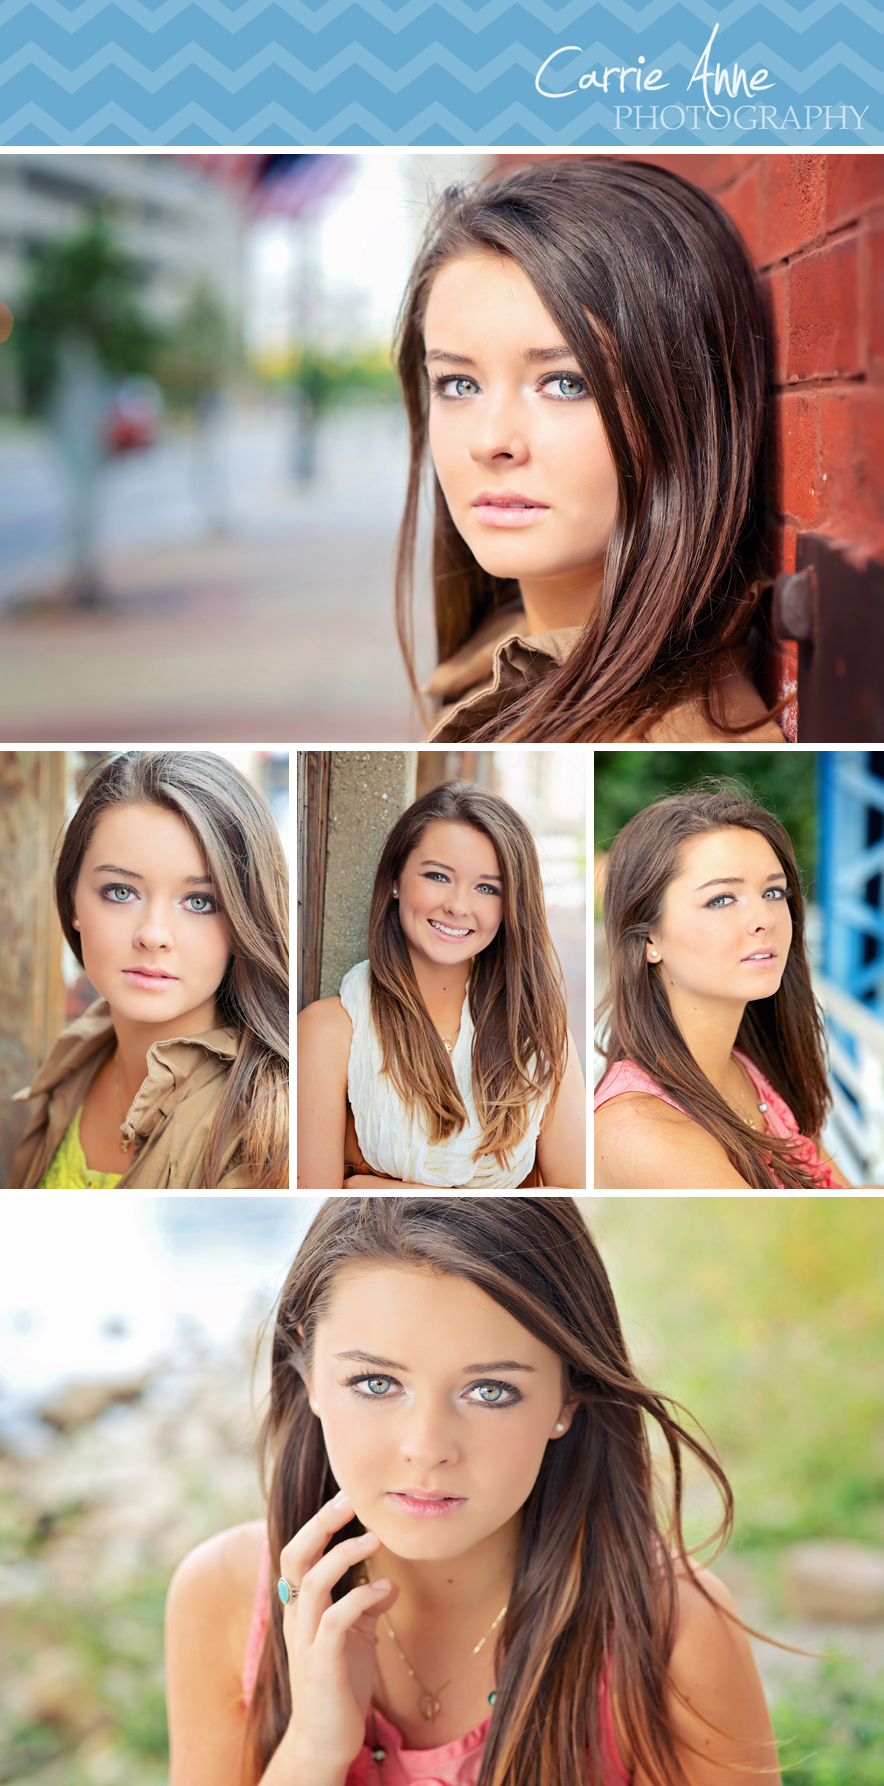 Ultimate Senior Girl Session in Ada, Grand Rapids, Cascade, Michigan. Natural, funky, bright, cheery, colorful, photography.